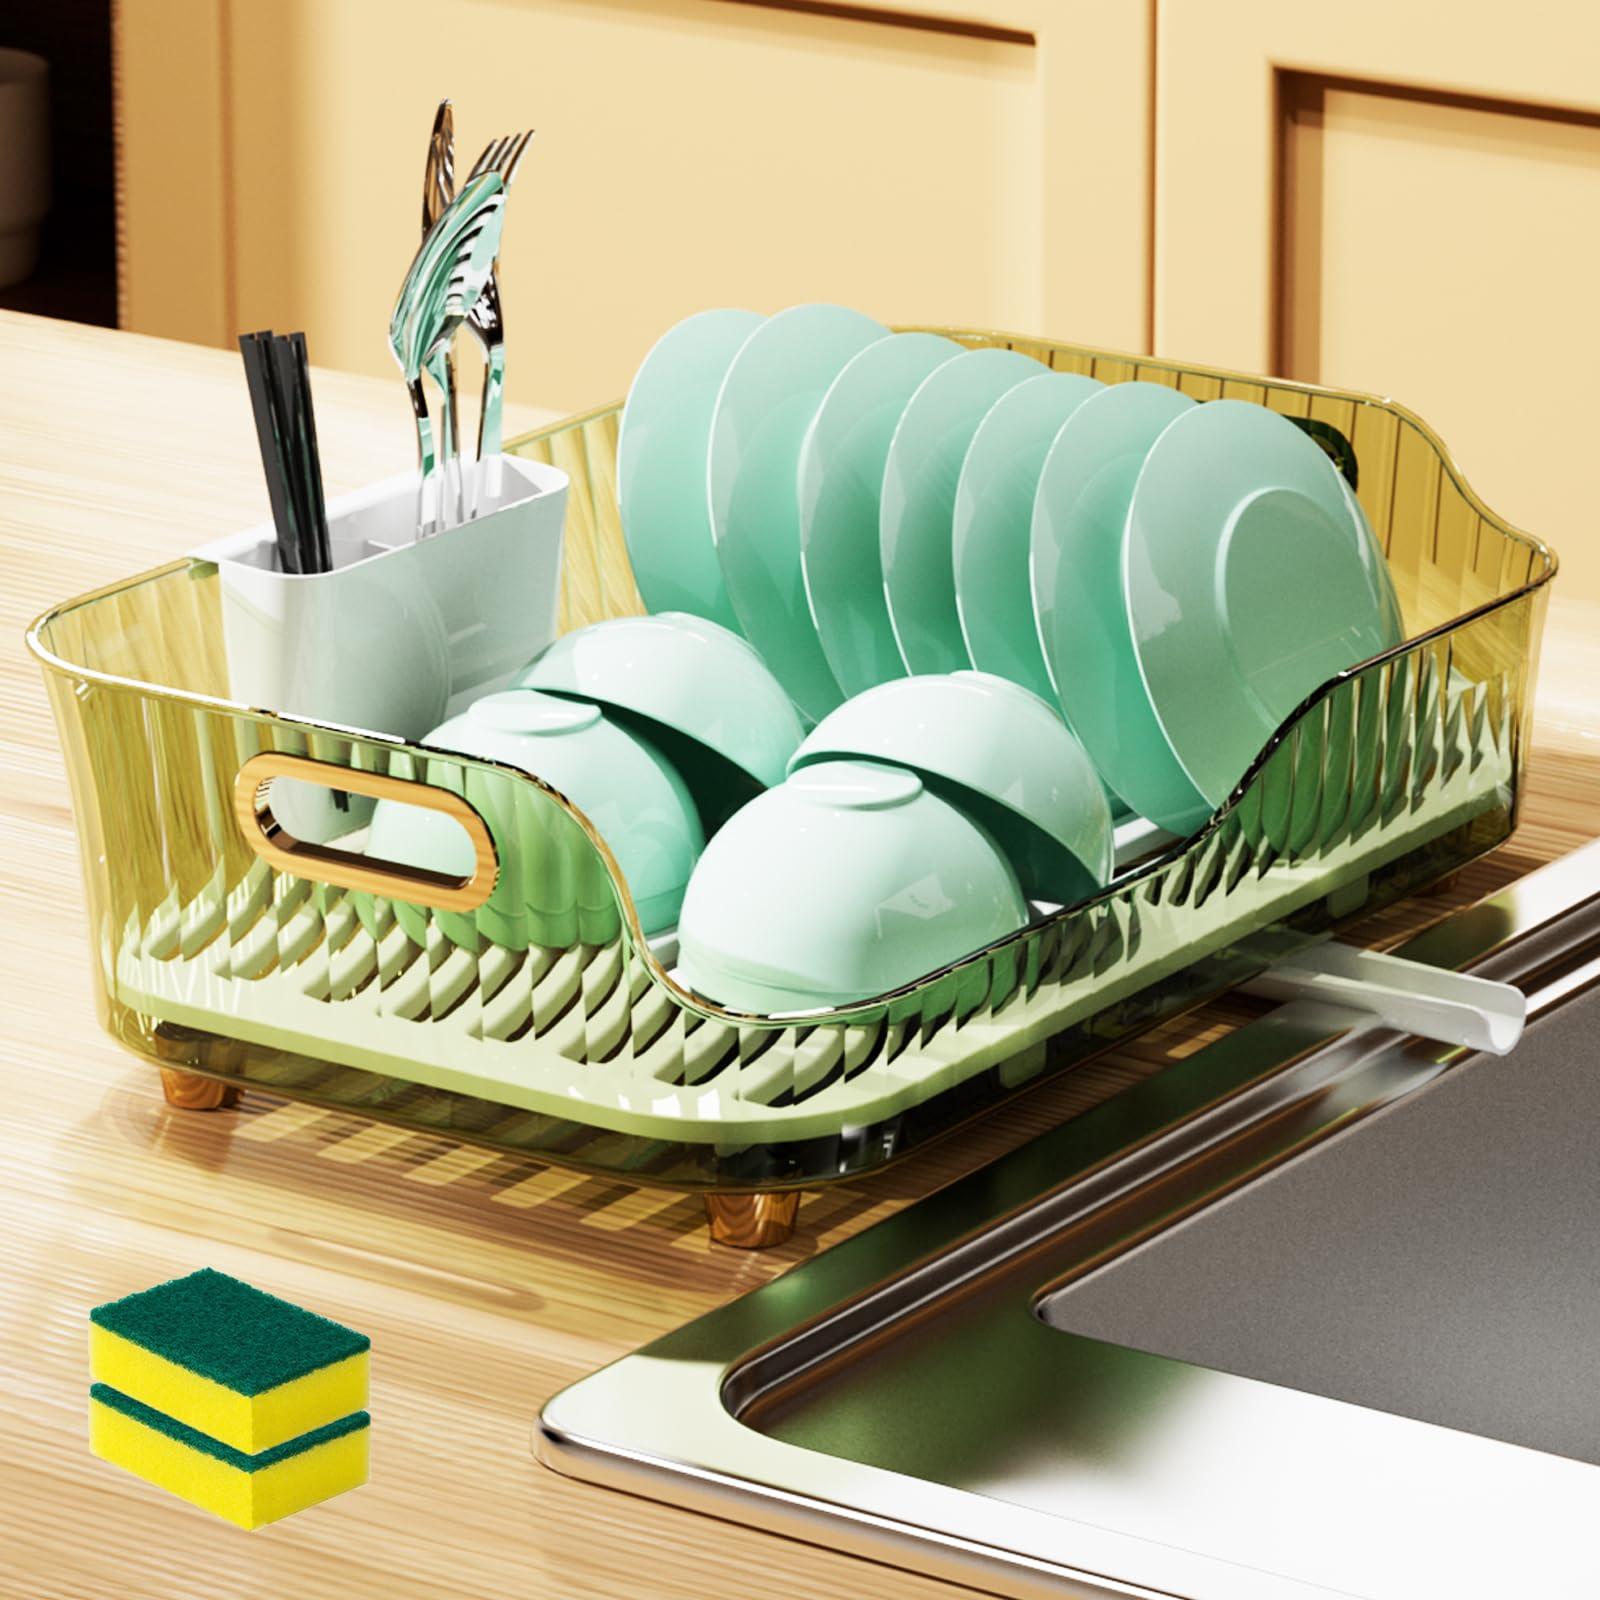 GlSAKE Kitchen Dish Drainer Rack With Removable Drip Tray Utensil Drying Holder Washing Up Drainer Rack Plate Organiser for Kitchen Cupboard (Green) 0